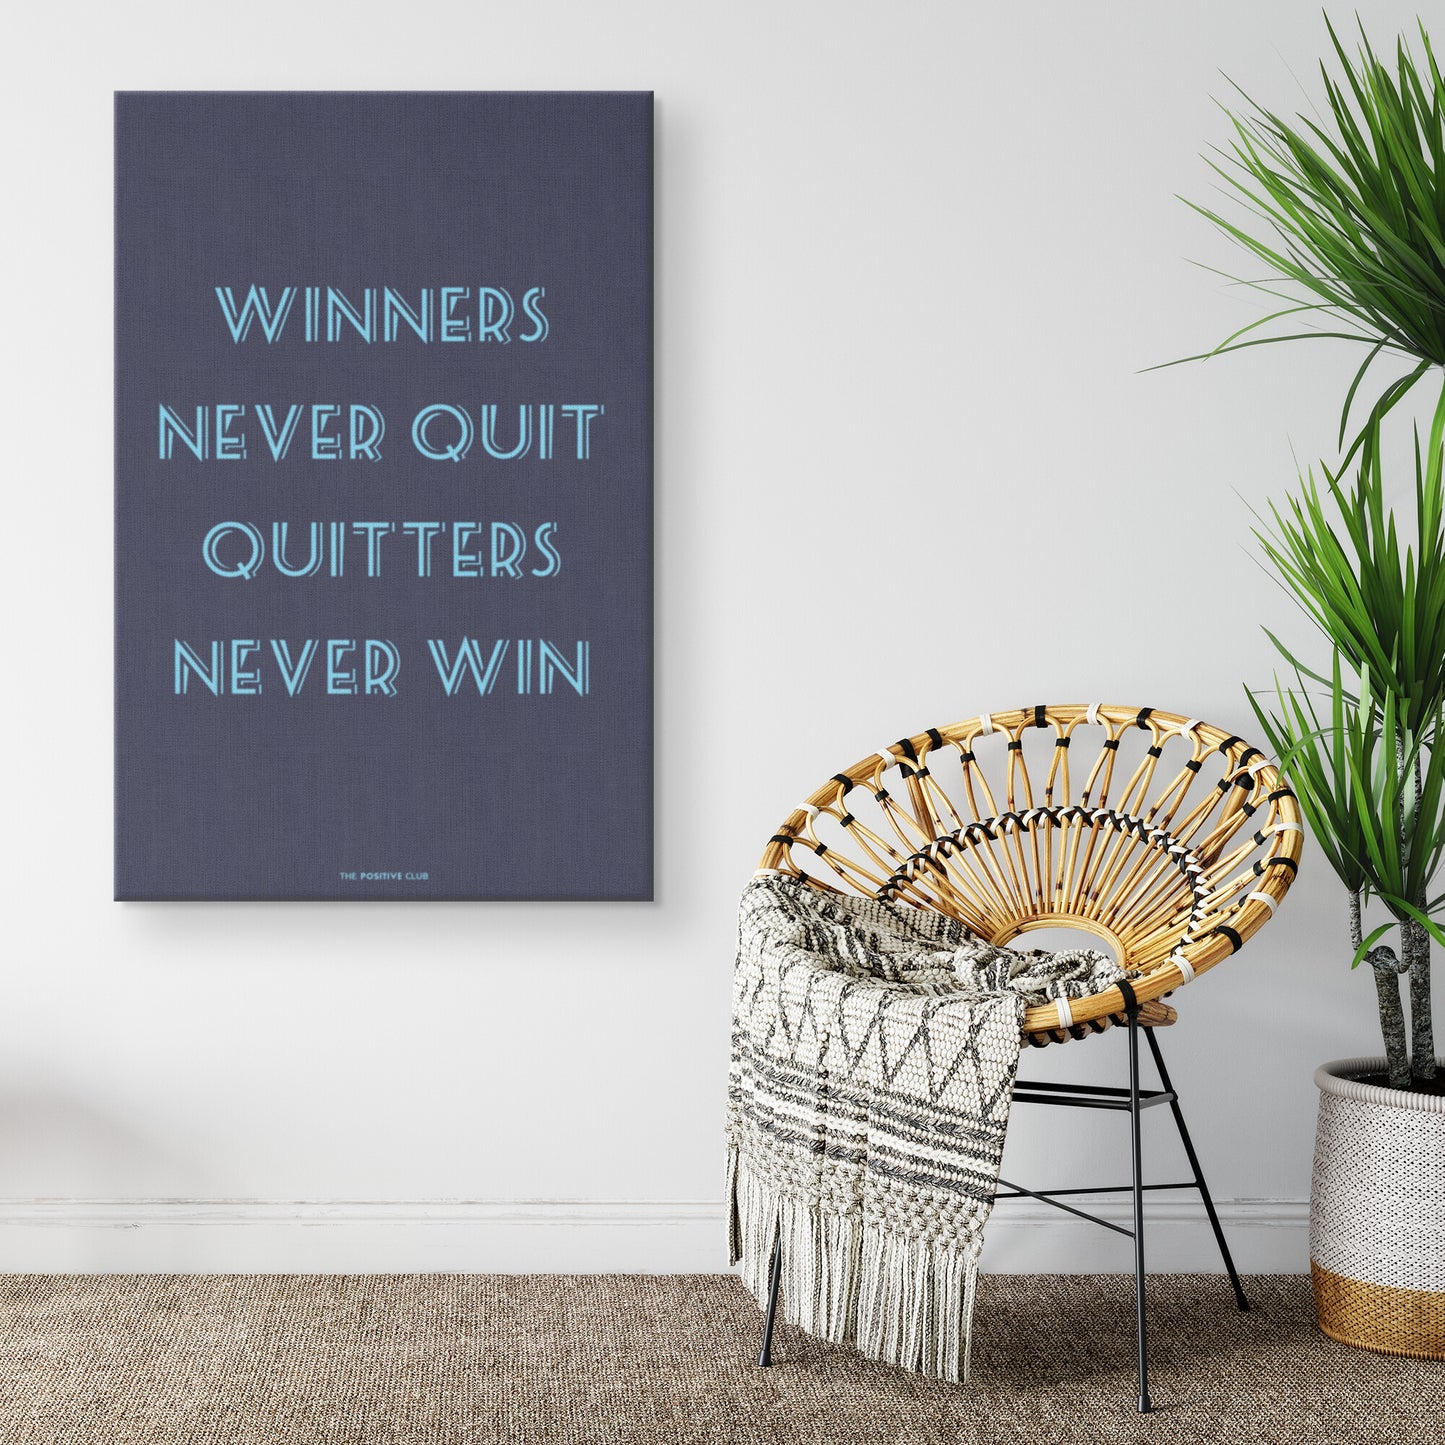 WINNERS NEVER QUIT QUITTERS NEVER WIN